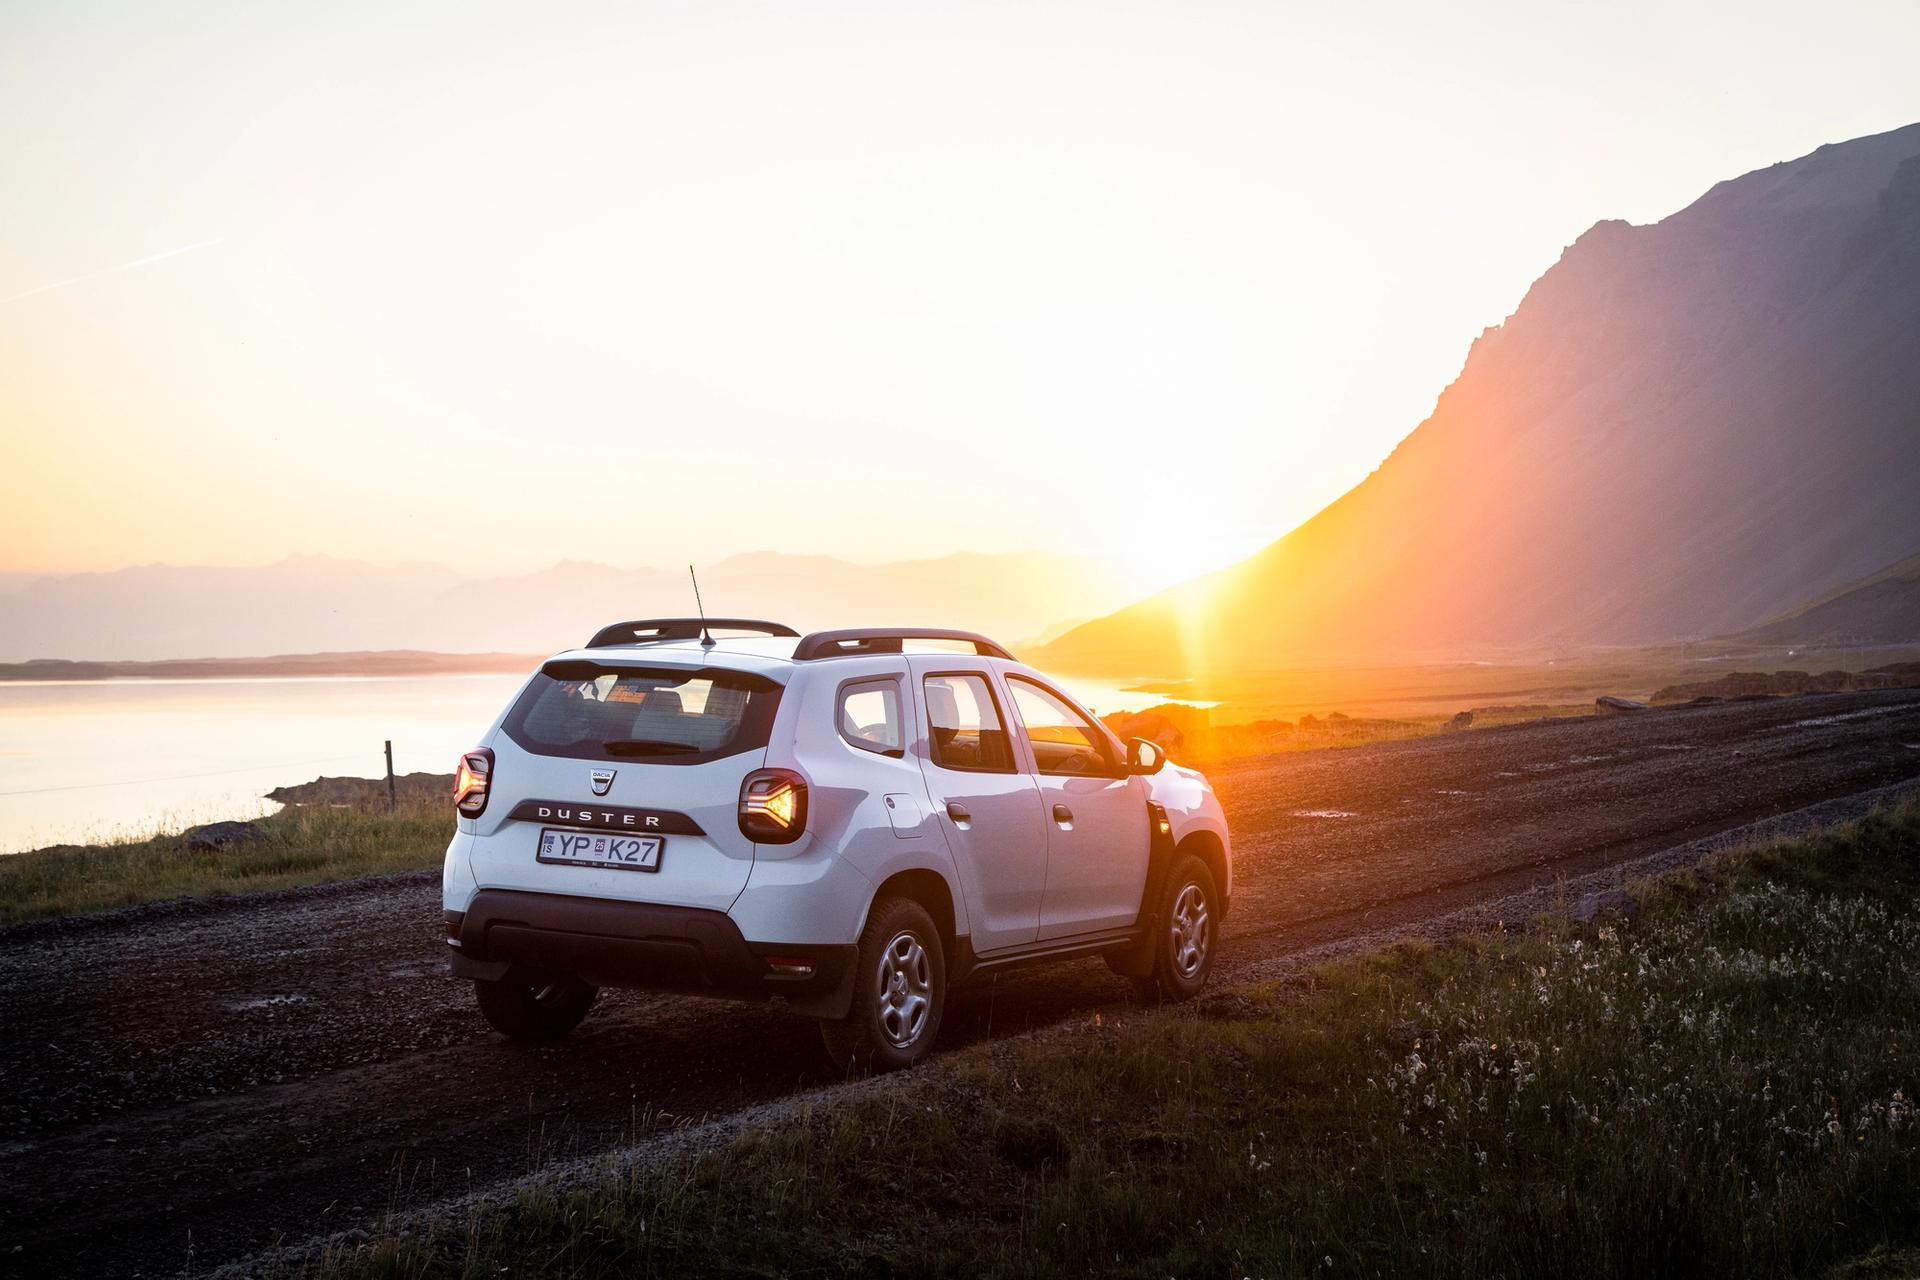 White 4x4 Dacia Duster rental car parked in Iceland while watching the sunset